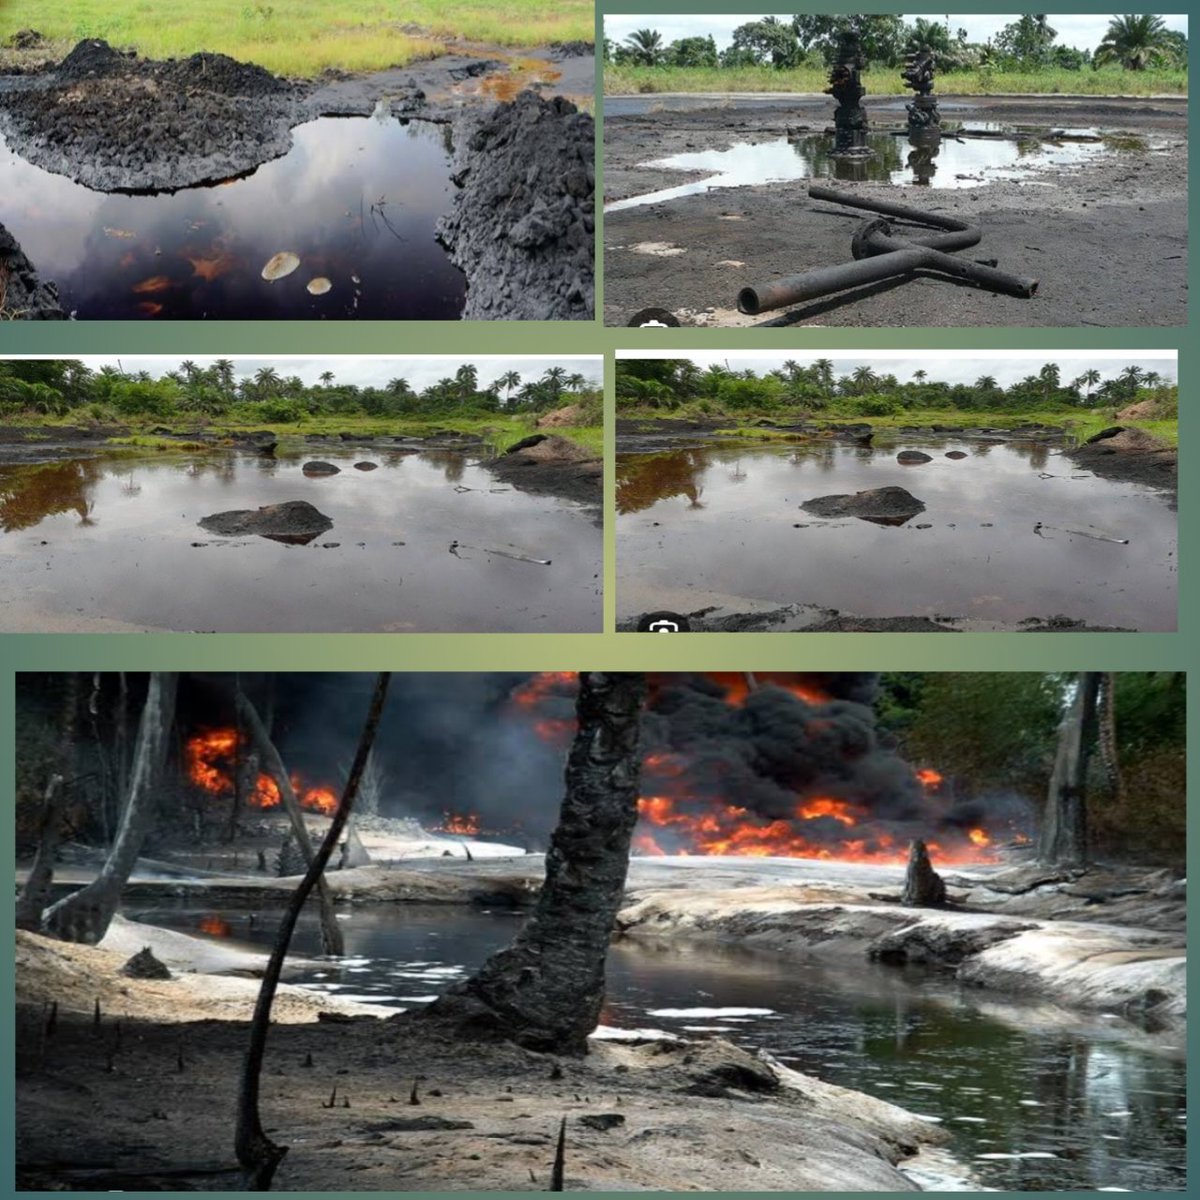 Today is fifth day of GlobalWeek of Action against fossilFuel  Expansion. I implore everyone to signal to SINOSURE & China Re in whatever manner he can,  that we hate  the mistake they are about to make by insuring #EACOP. Uganda doesn't want disasters like 4Nigeria below.